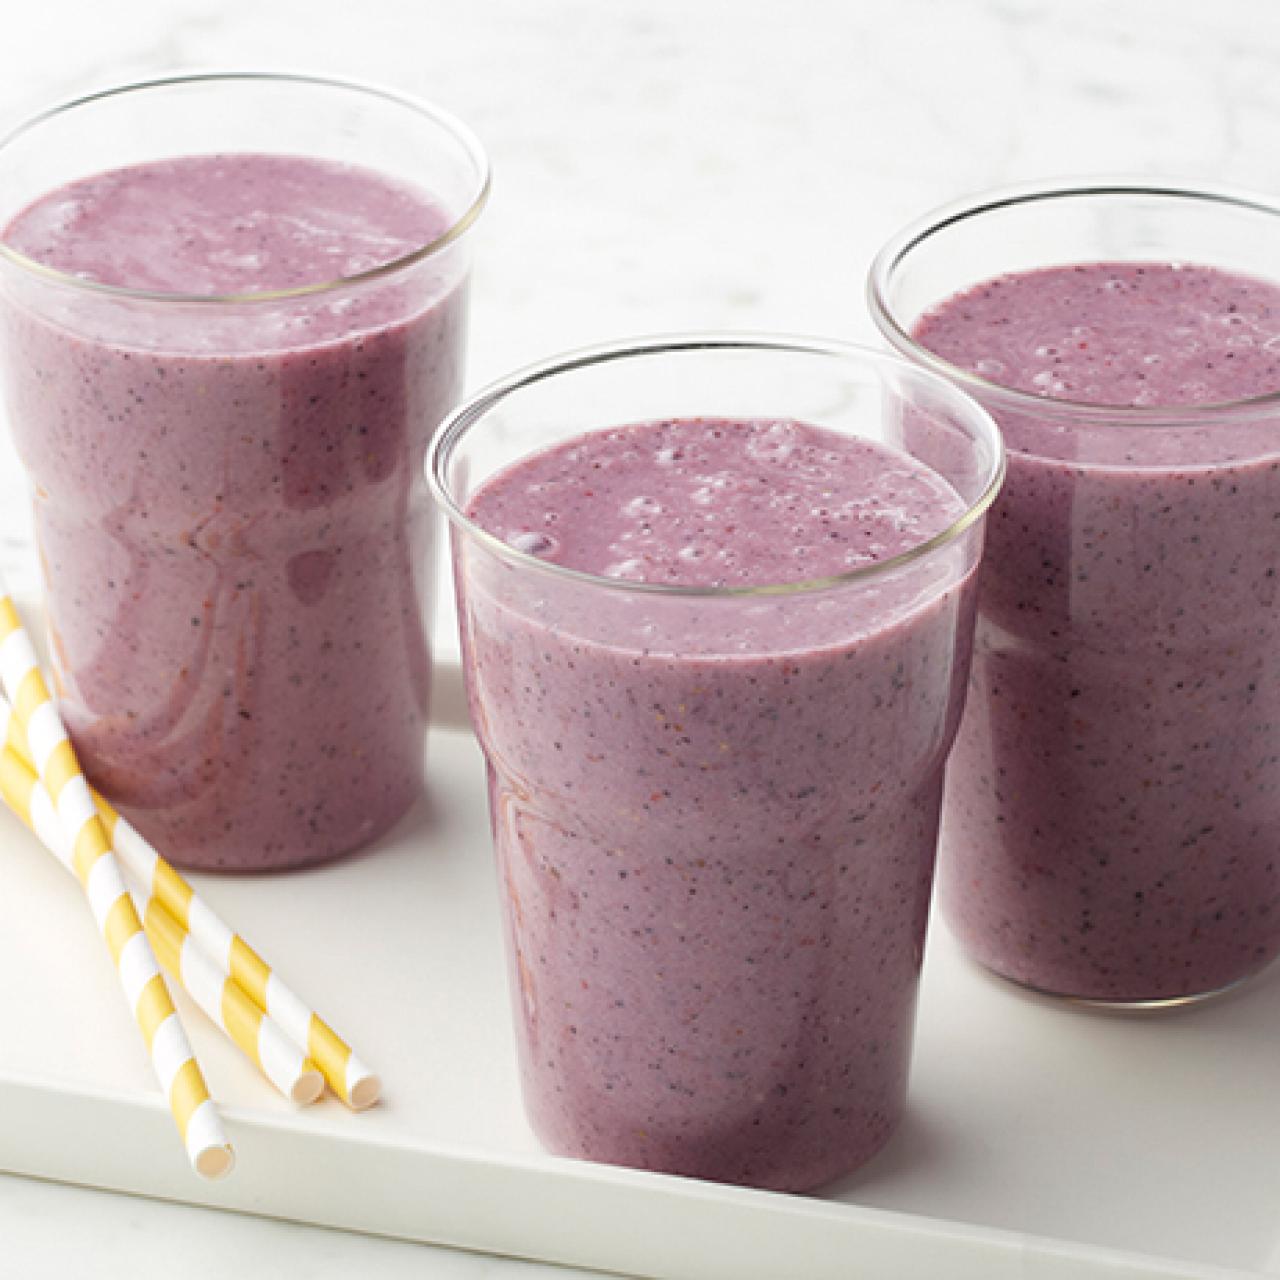 Healthy Smoothie Recipes for Weight Loss - Next Level Urgent Care